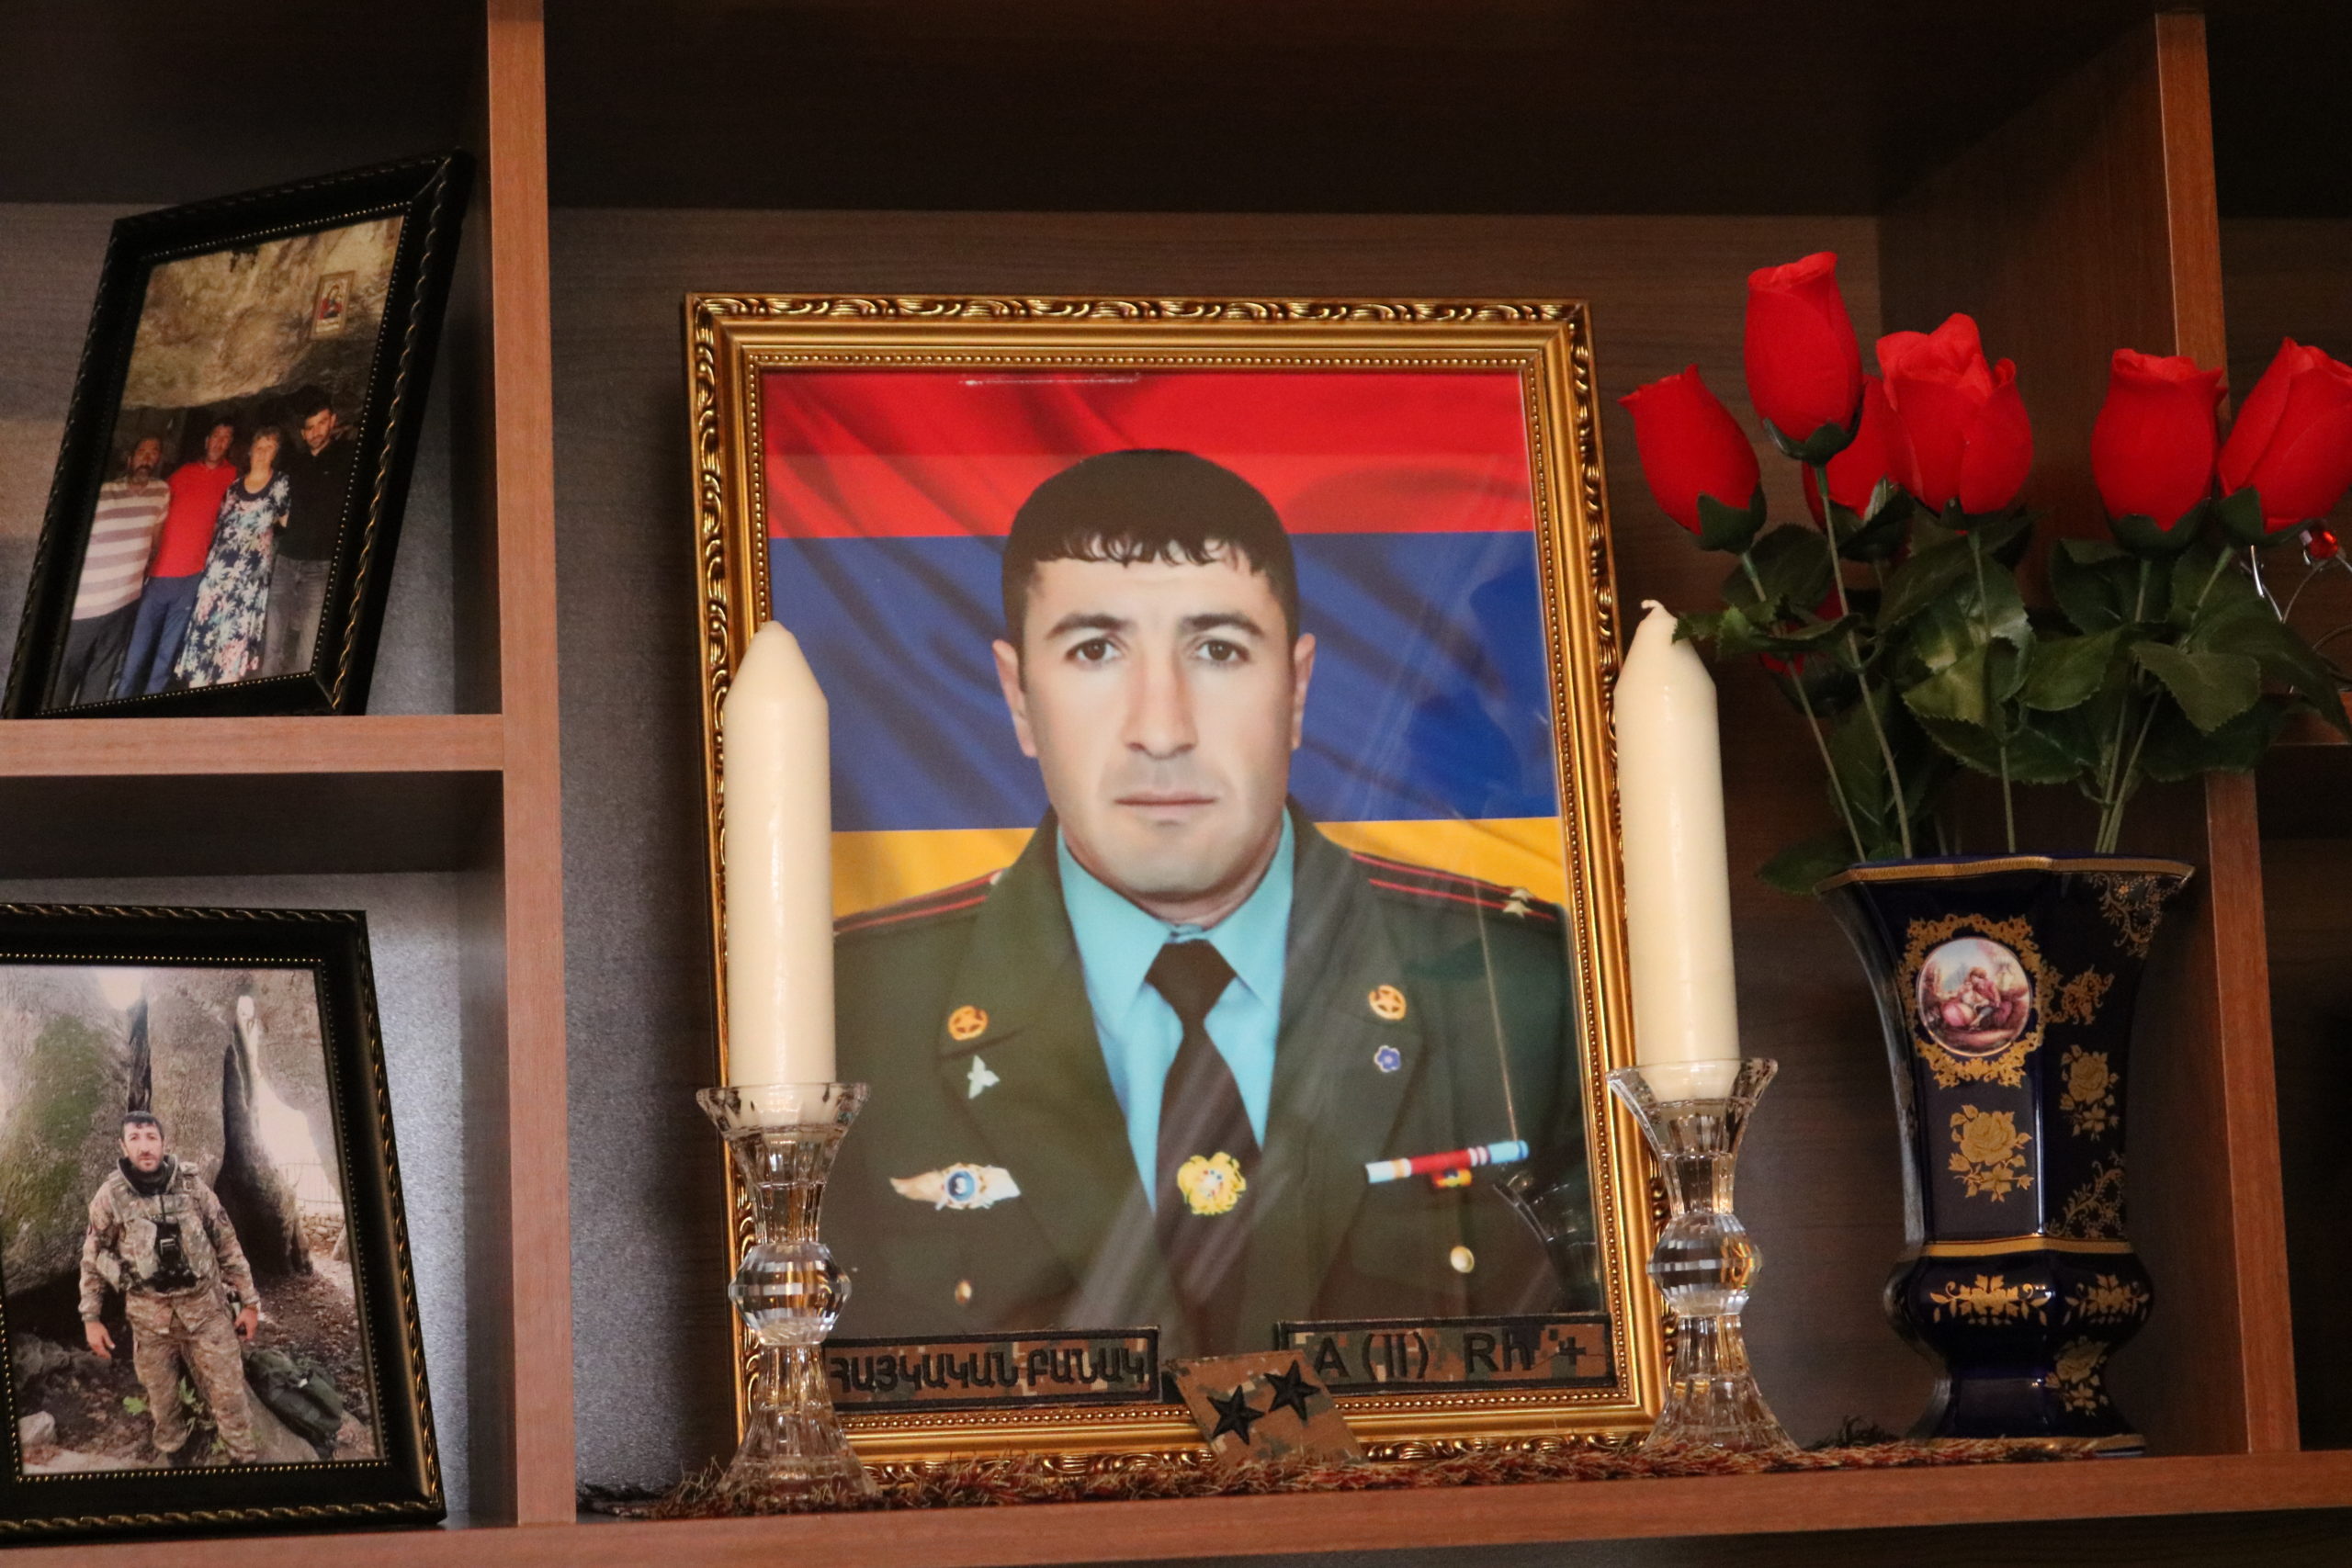 Lieutenant Colonel Andranik Manukyan served for seven years and died in Hadrut